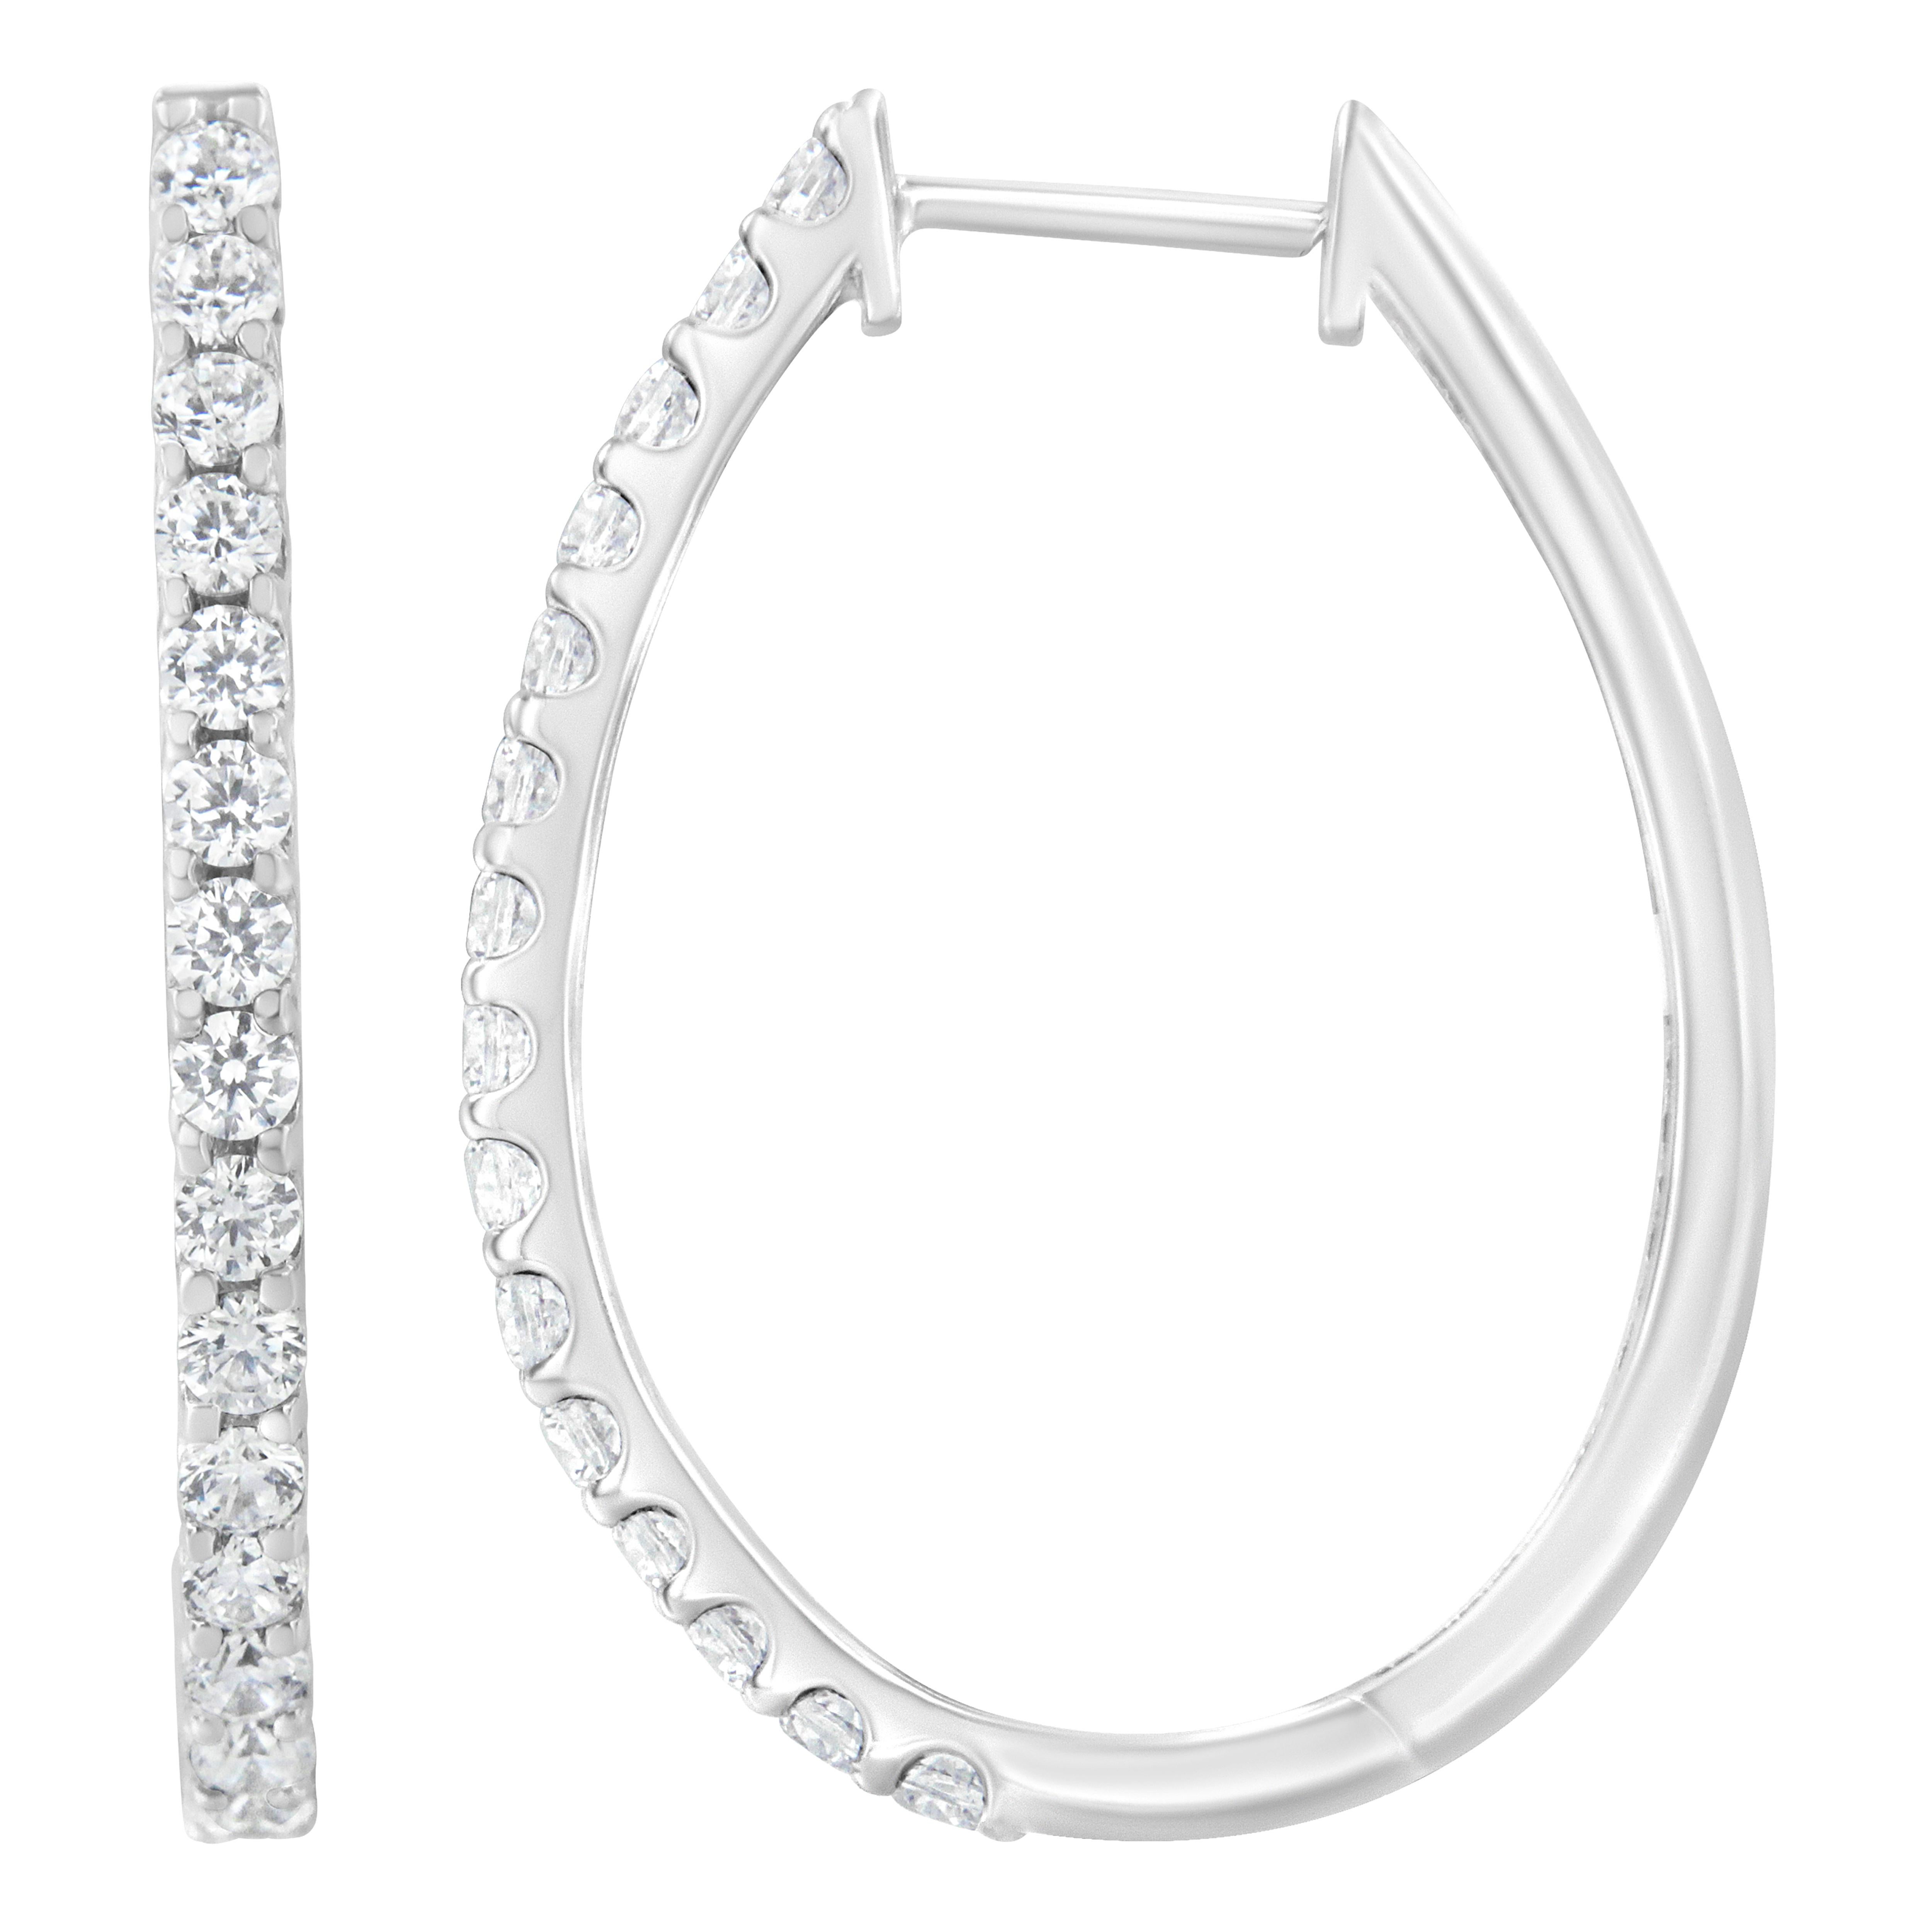 These glamorous 14k white gold hoop earrings showcase 2 ct of round cut diamonds. The prong set diamonds inlay half the outside of the hoops giving them maximum sparkle. These gorgeous hoop earrings are the perfect gift for that trendy, special